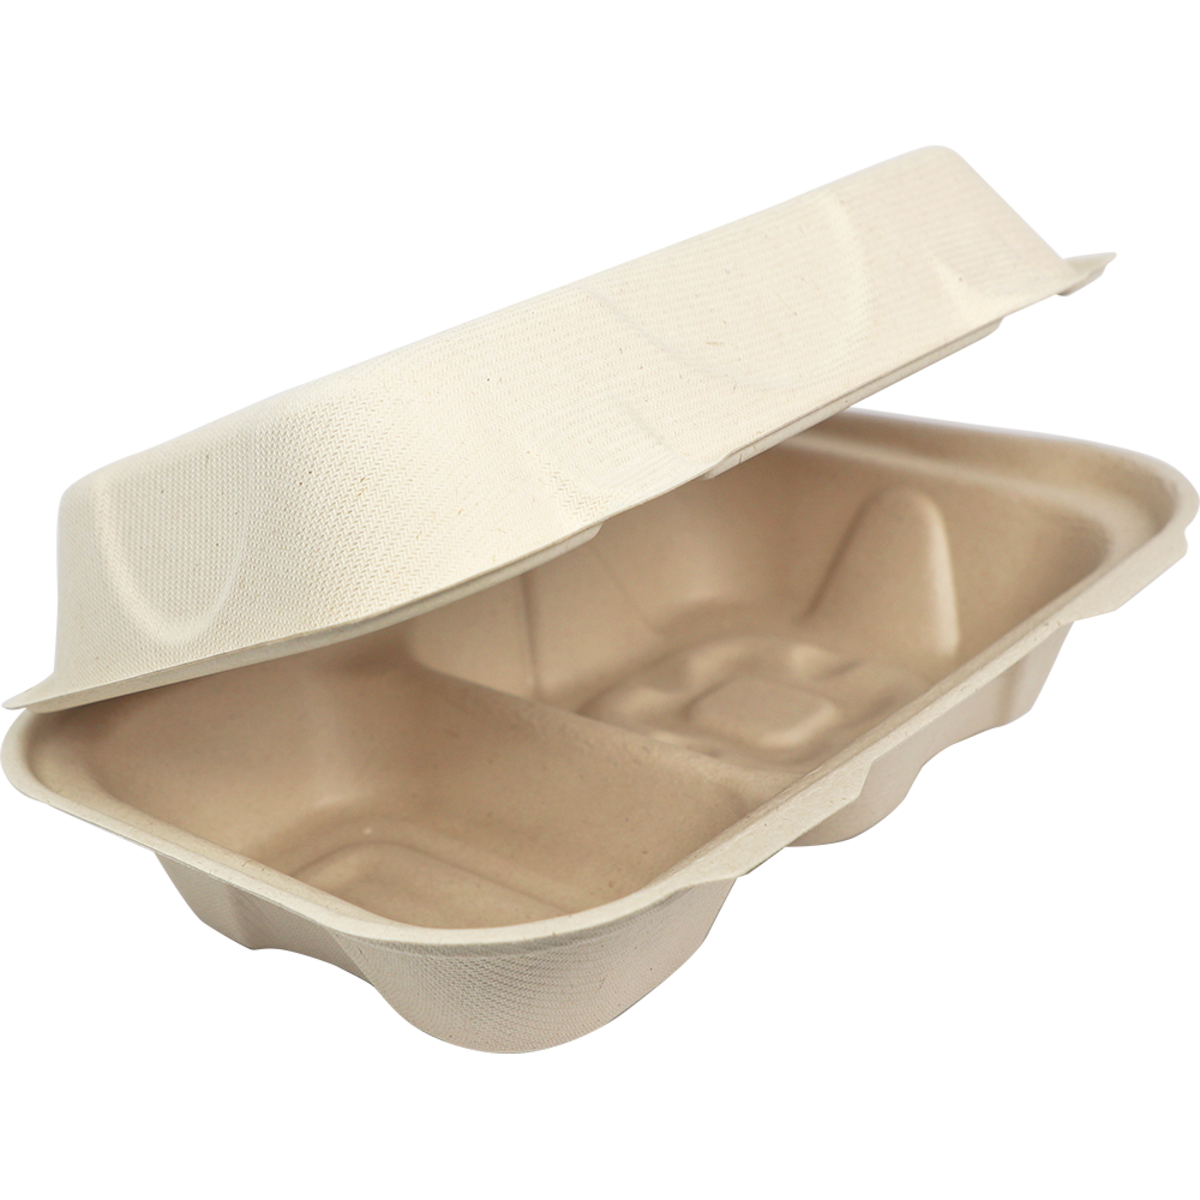 9" x 6" x 3" Clamshell Two Compartment | Natural Plant Fiber (Pack of 250)